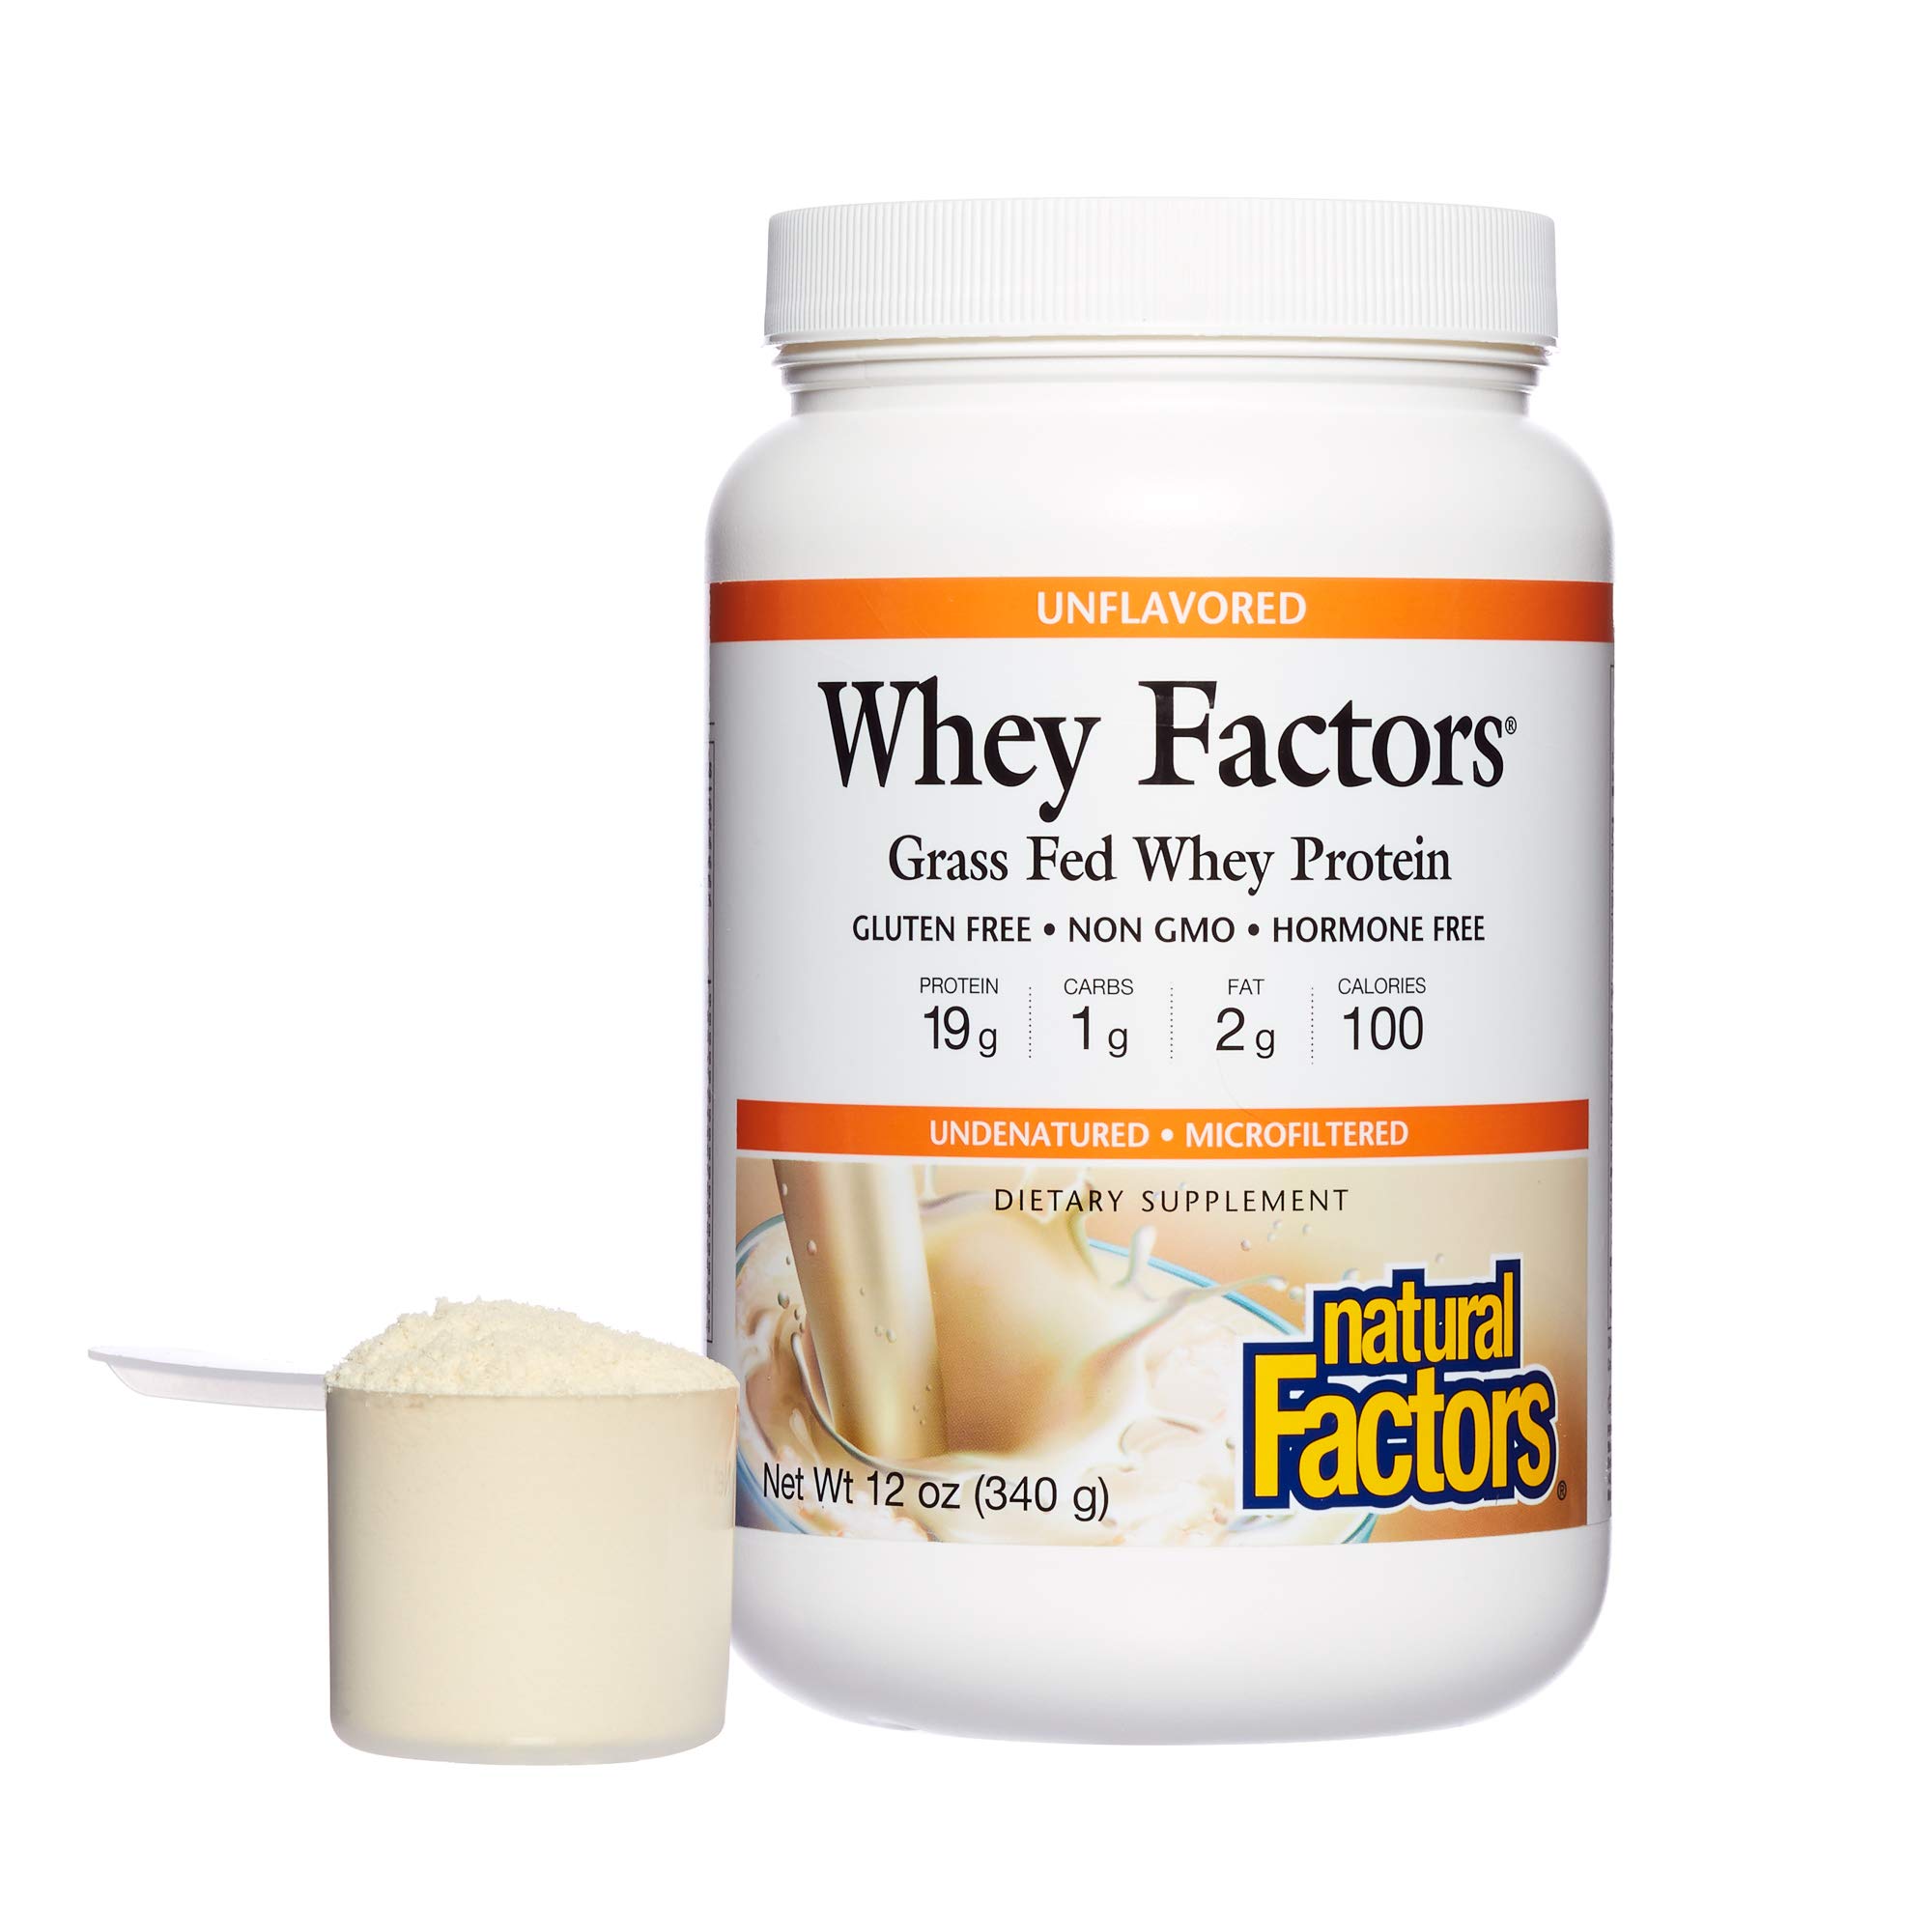 whey factors natural whey protein reviews